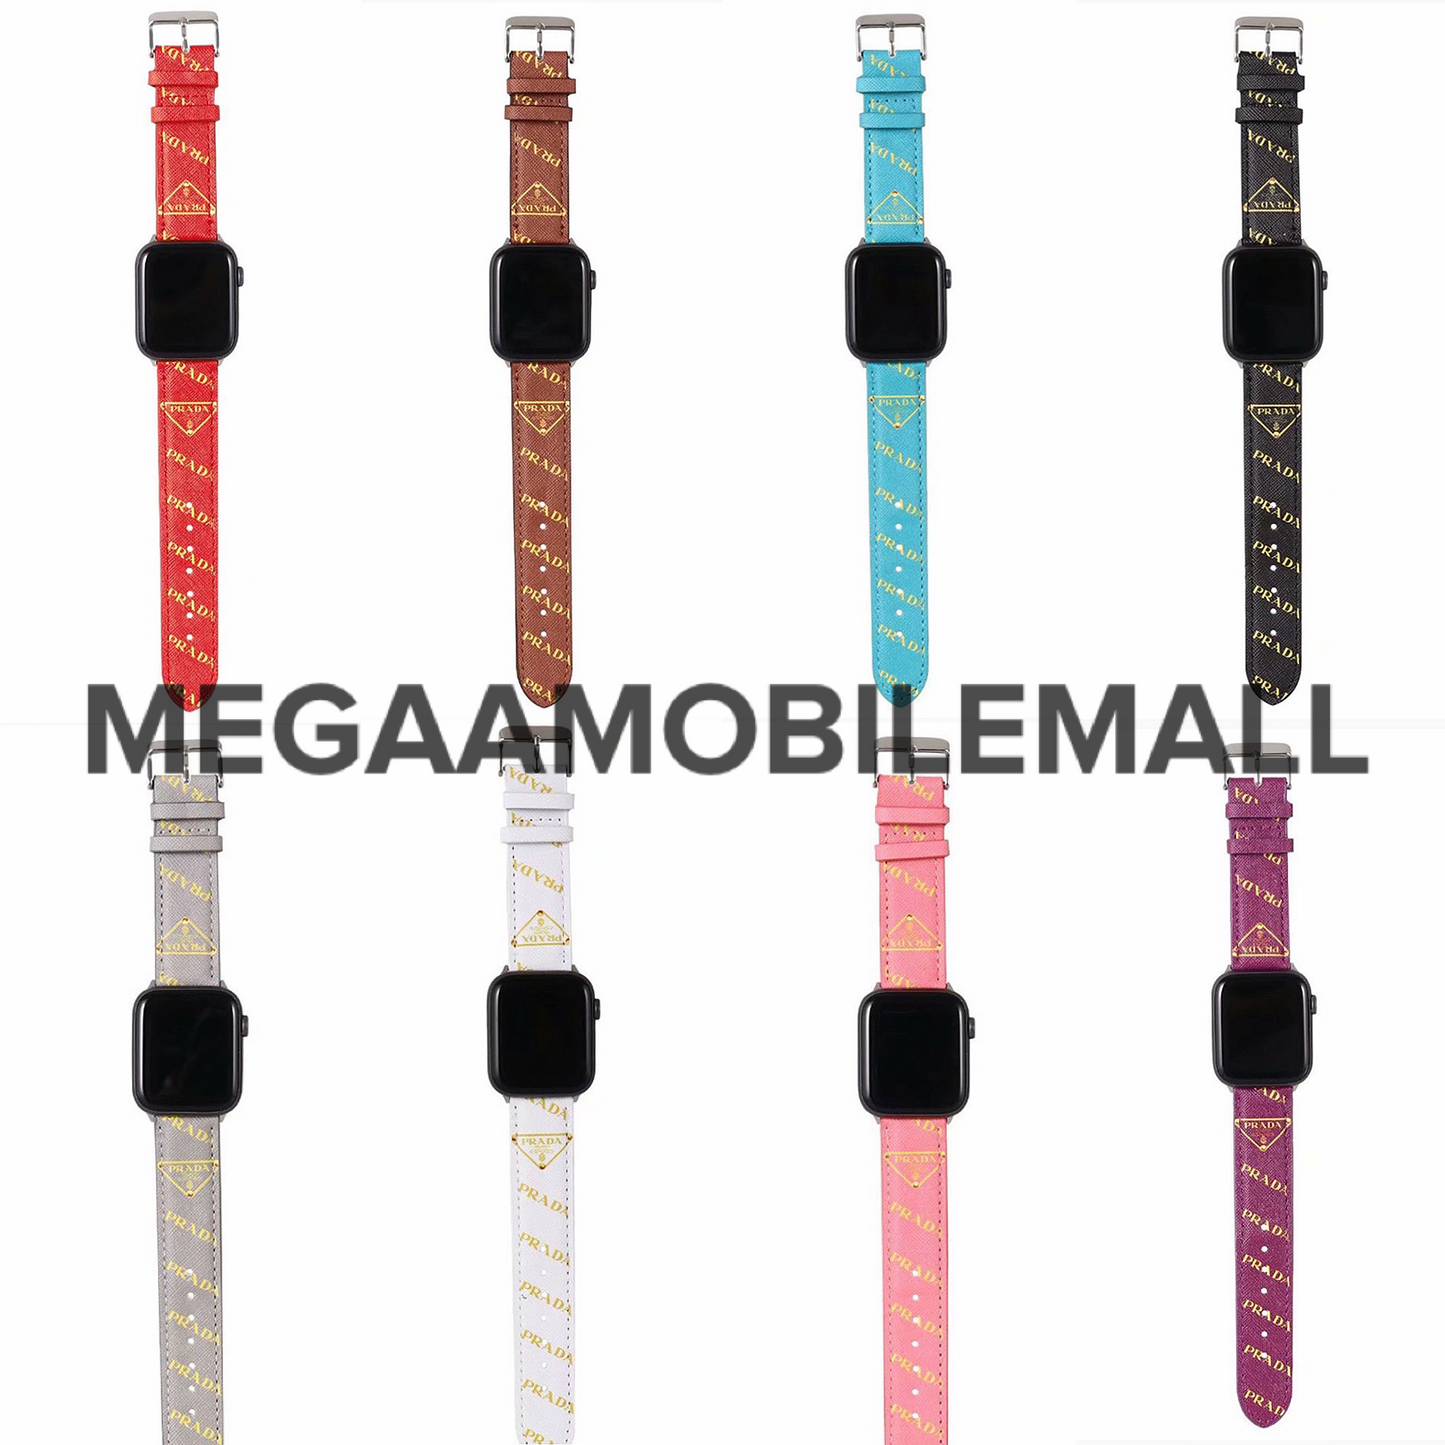 prada apple watch bands 8 different colors red, brown, black, sky blue, gray, white, purple, pink